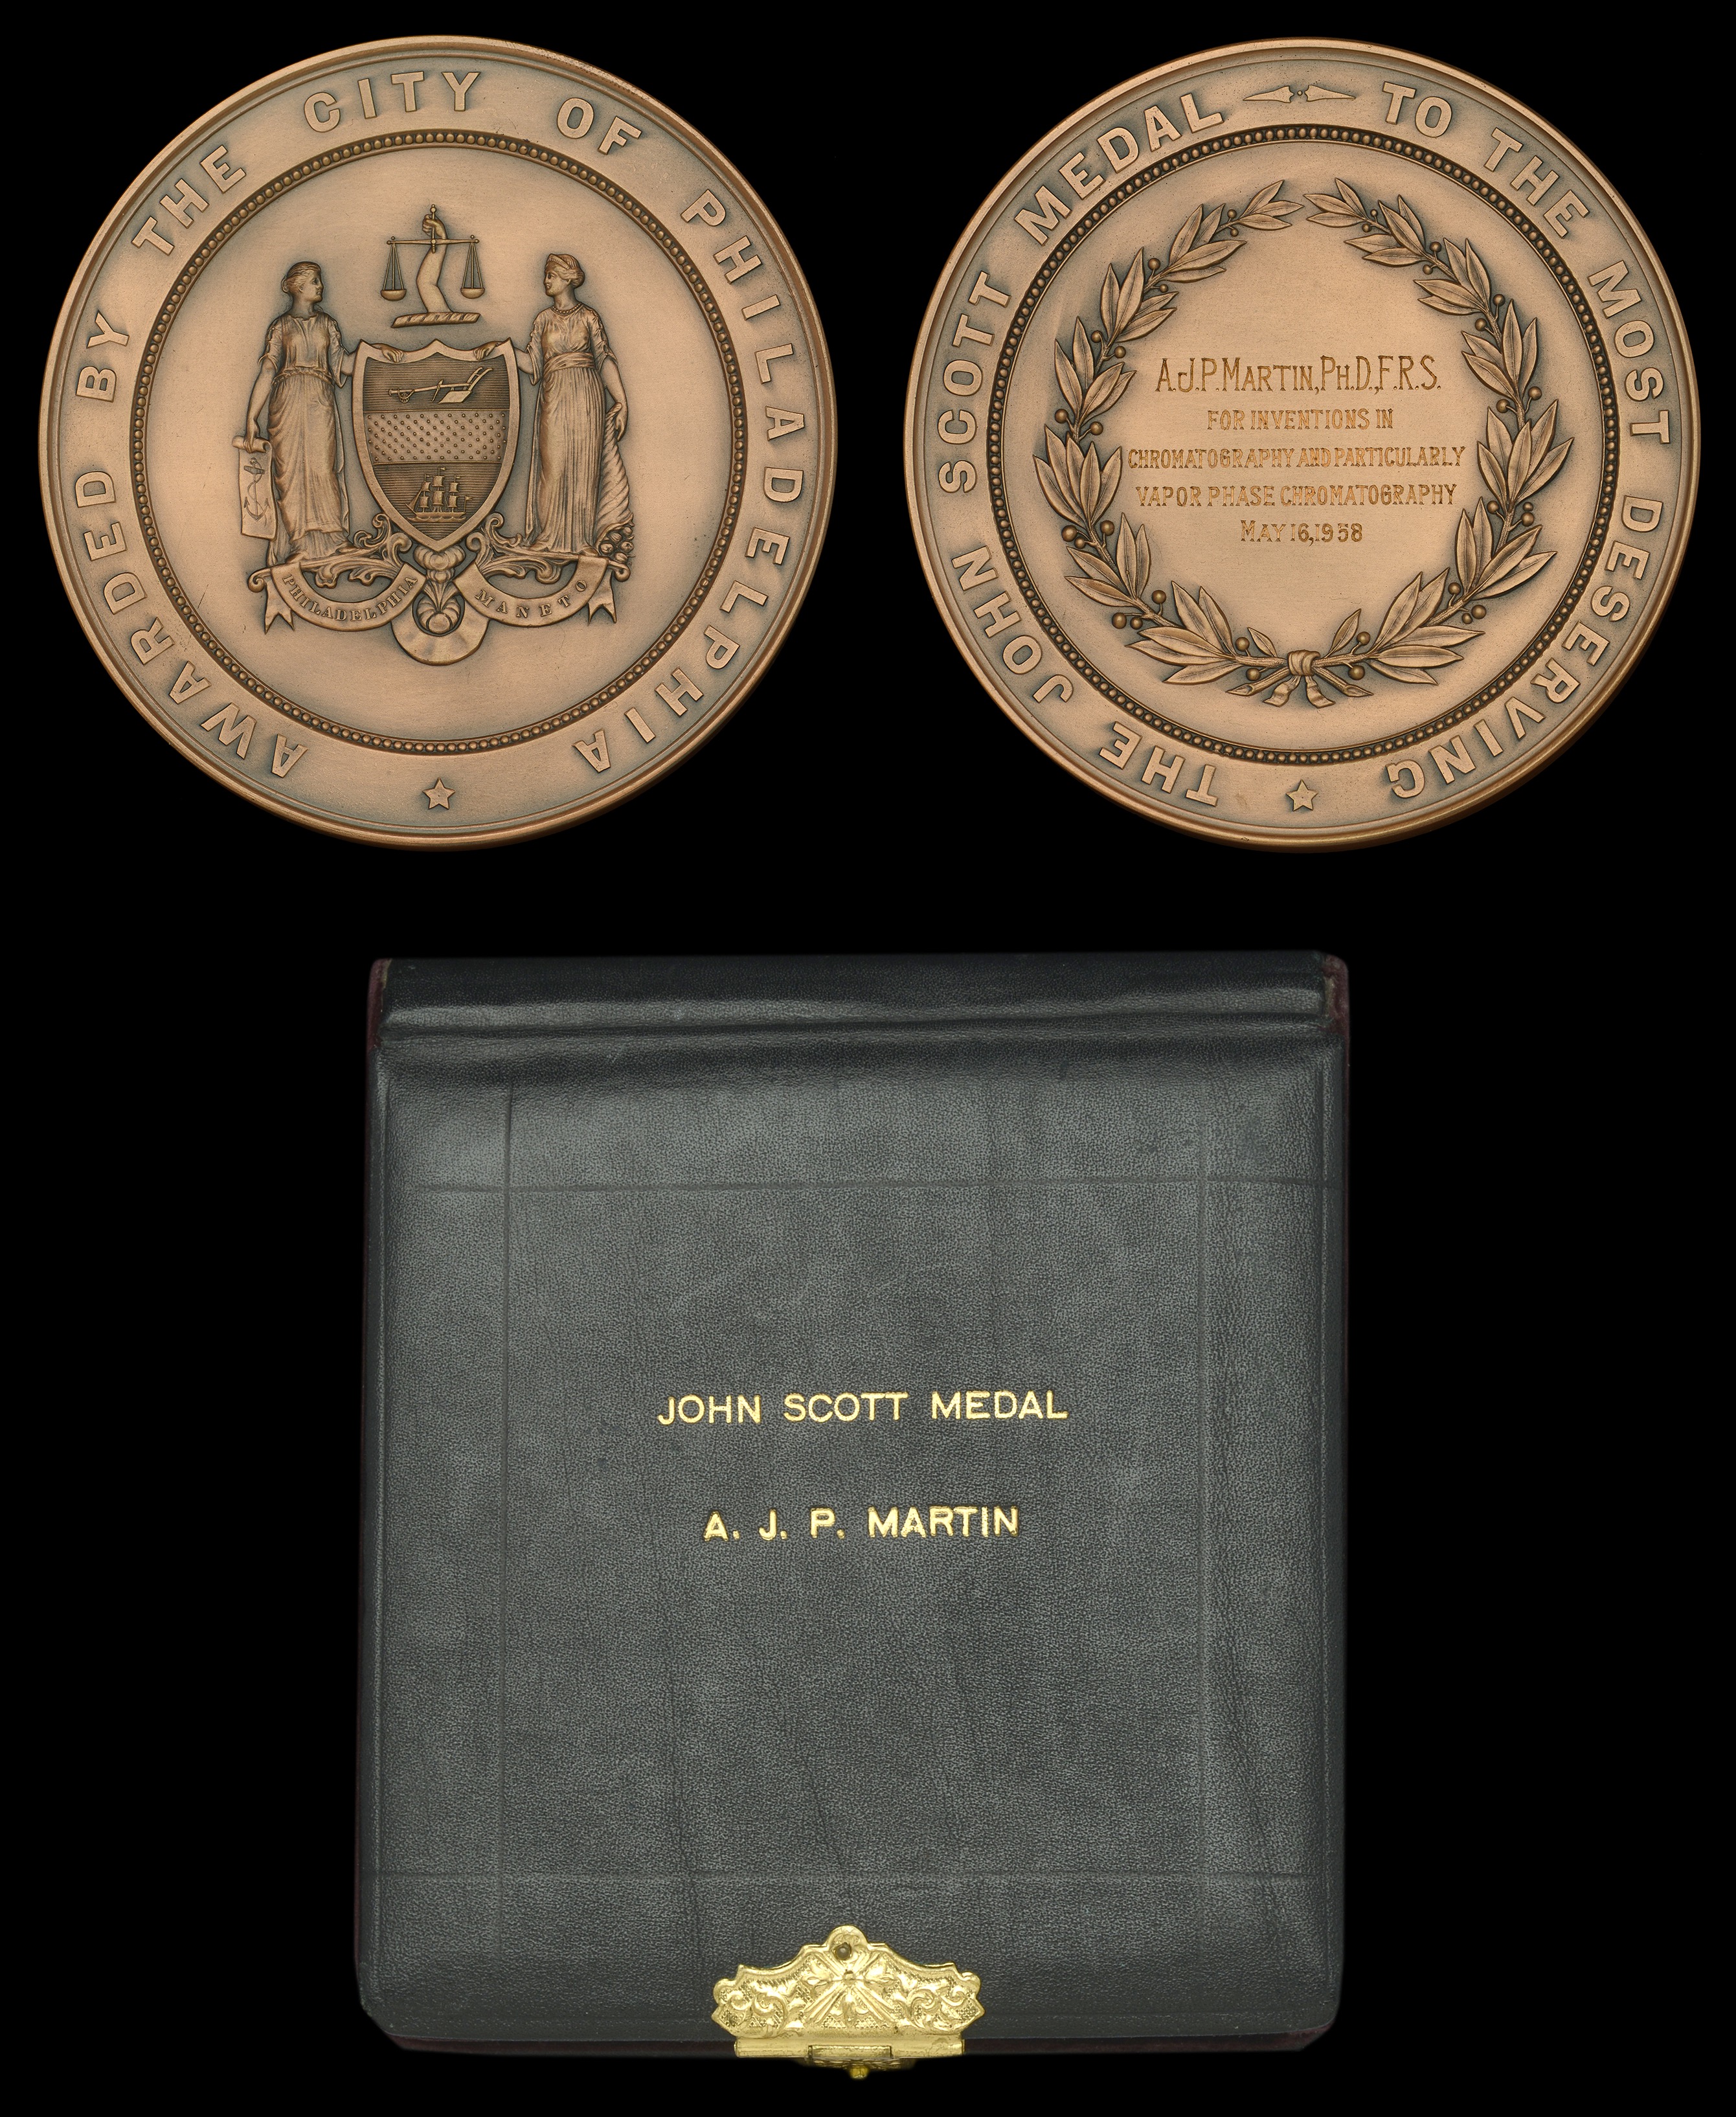 The honours and awards bestowed upon Archer Martin, National Institute for Medical Research,... - Image 11 of 18